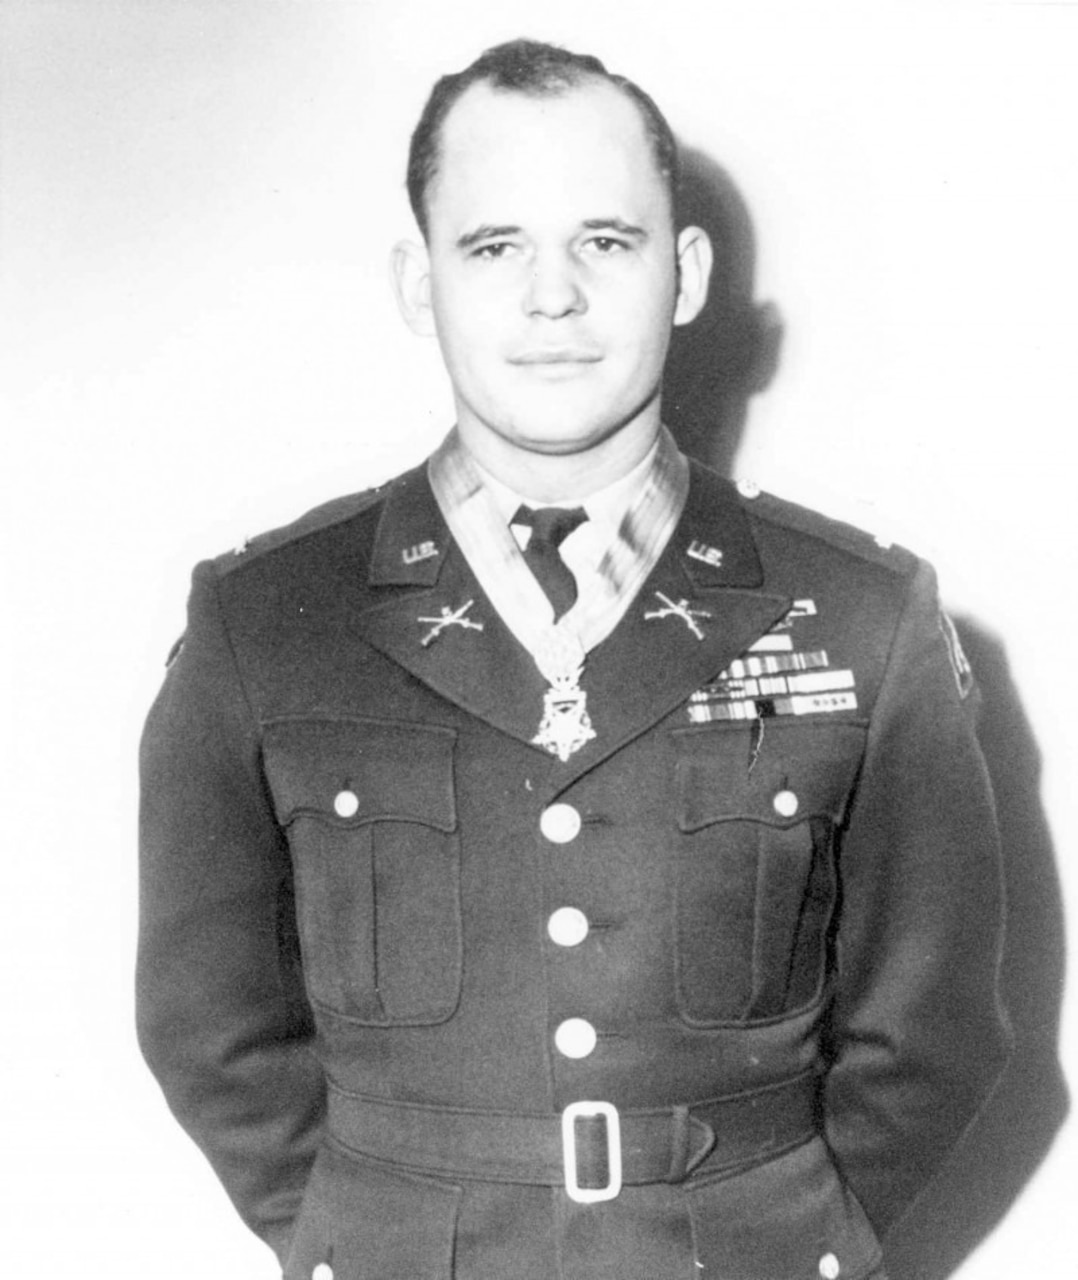 A soldier in dress uniform and medal around his neck stands with his hands behind his back.